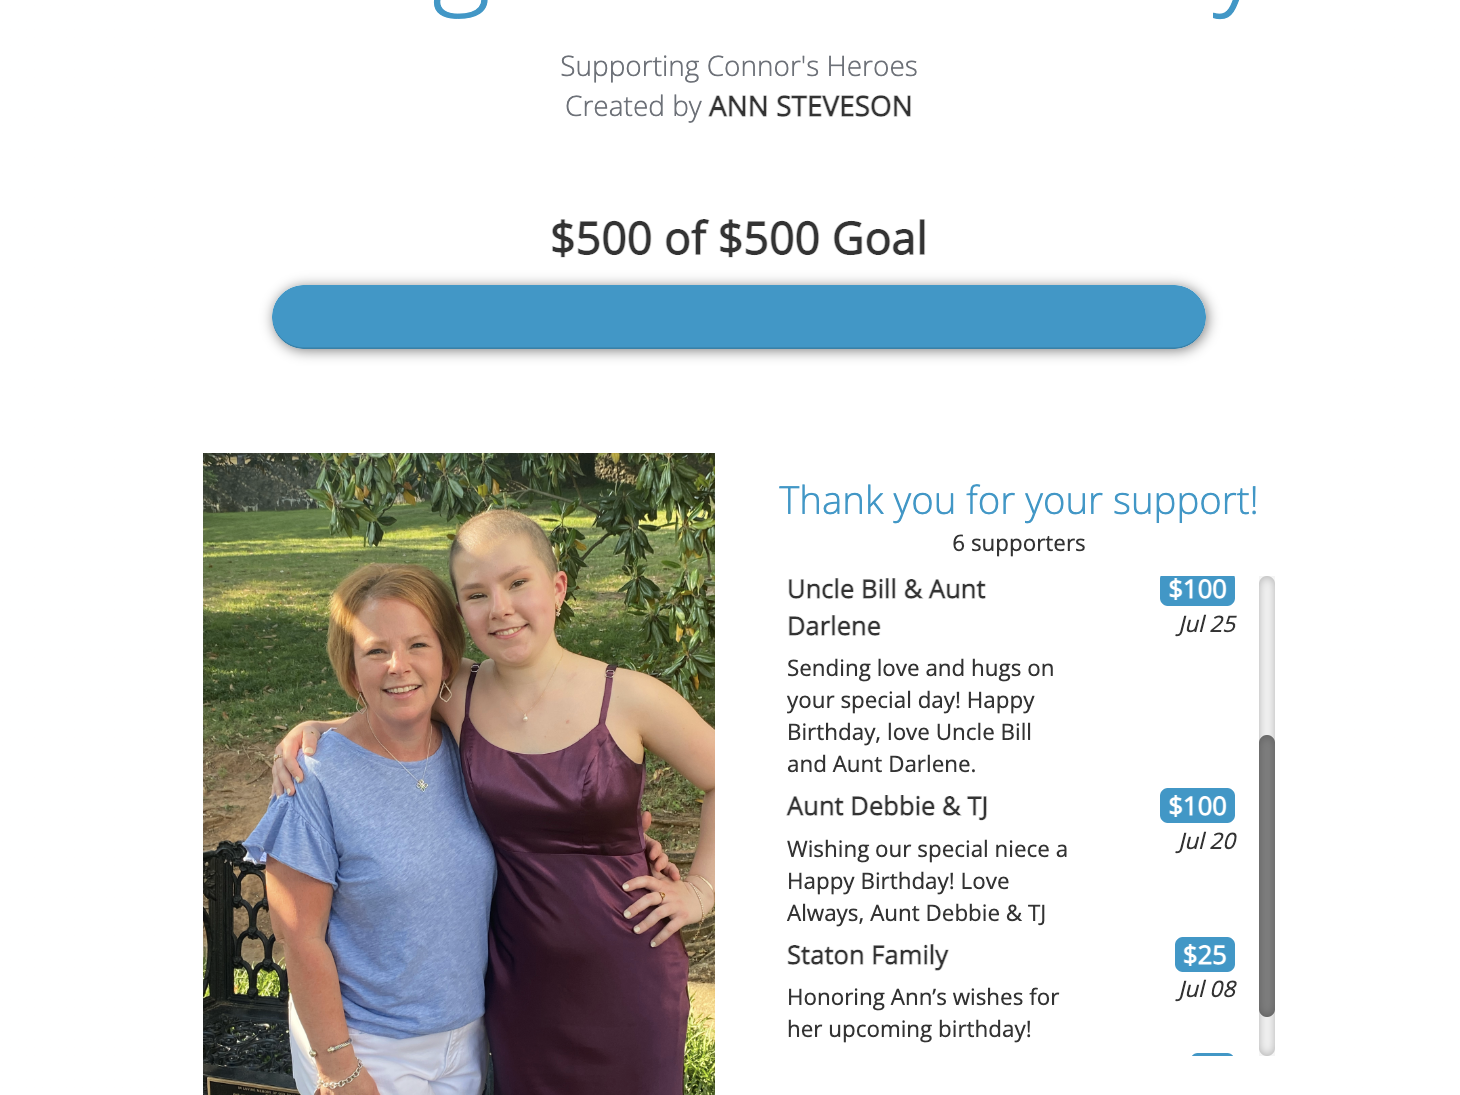 Screen shot of a webpage for Ann's birthday fundraiser she hosted for Connor's Heroes